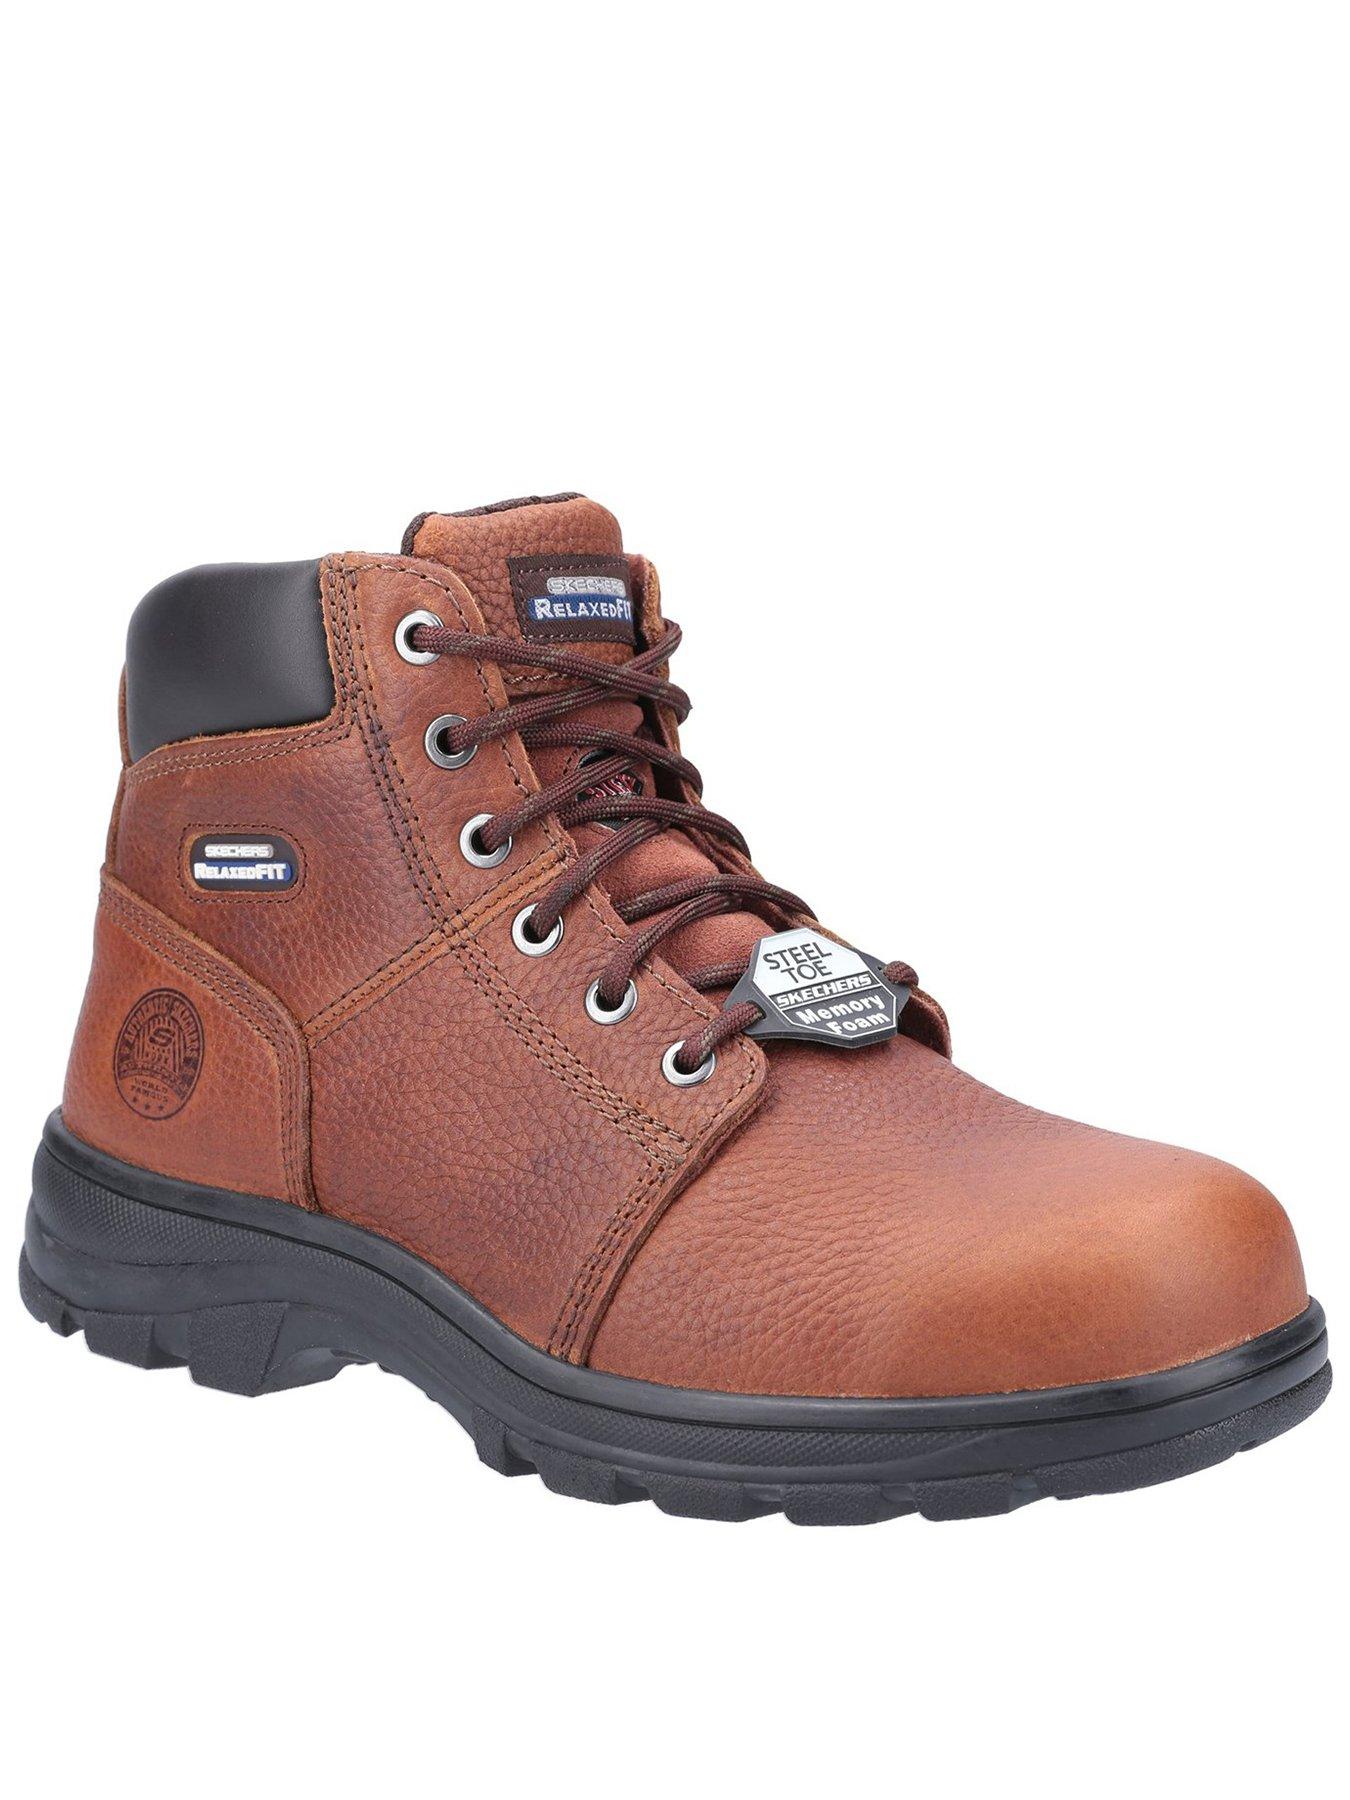 Skechers Workshire Leather Safety Boots 